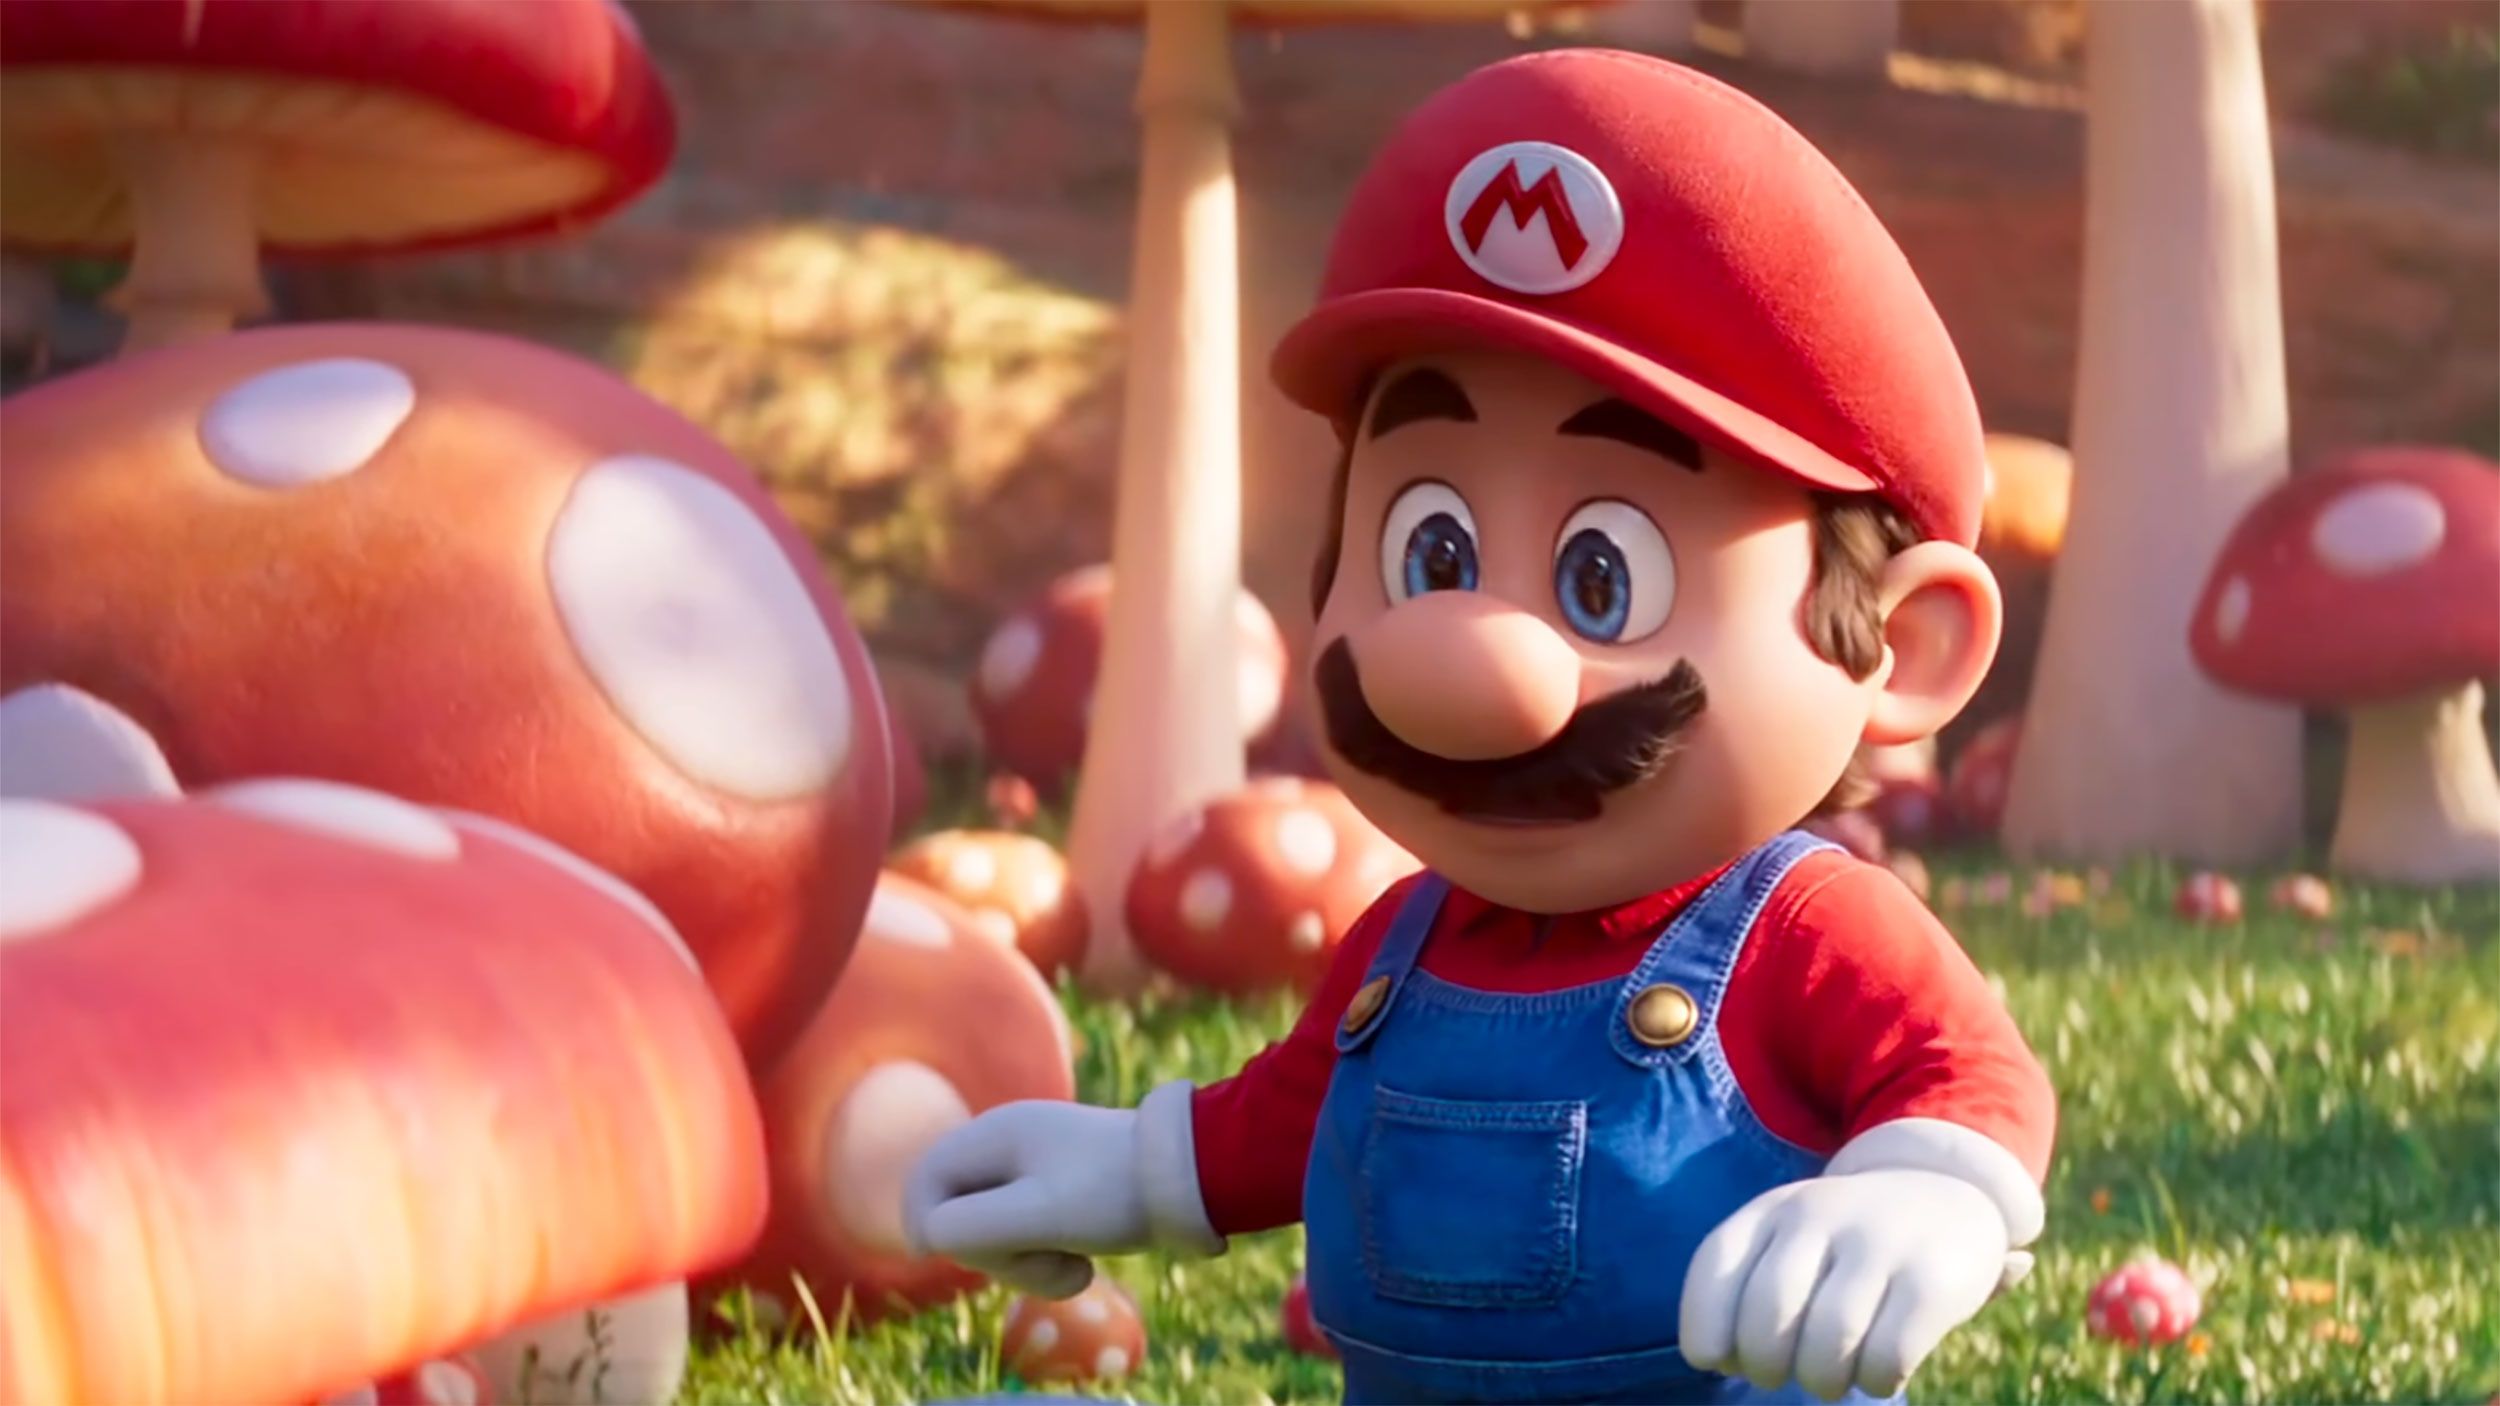 #FIRSTLOOK: NEW TRAILER FOR “THE SUPER MARIO BROS. MOVIE”